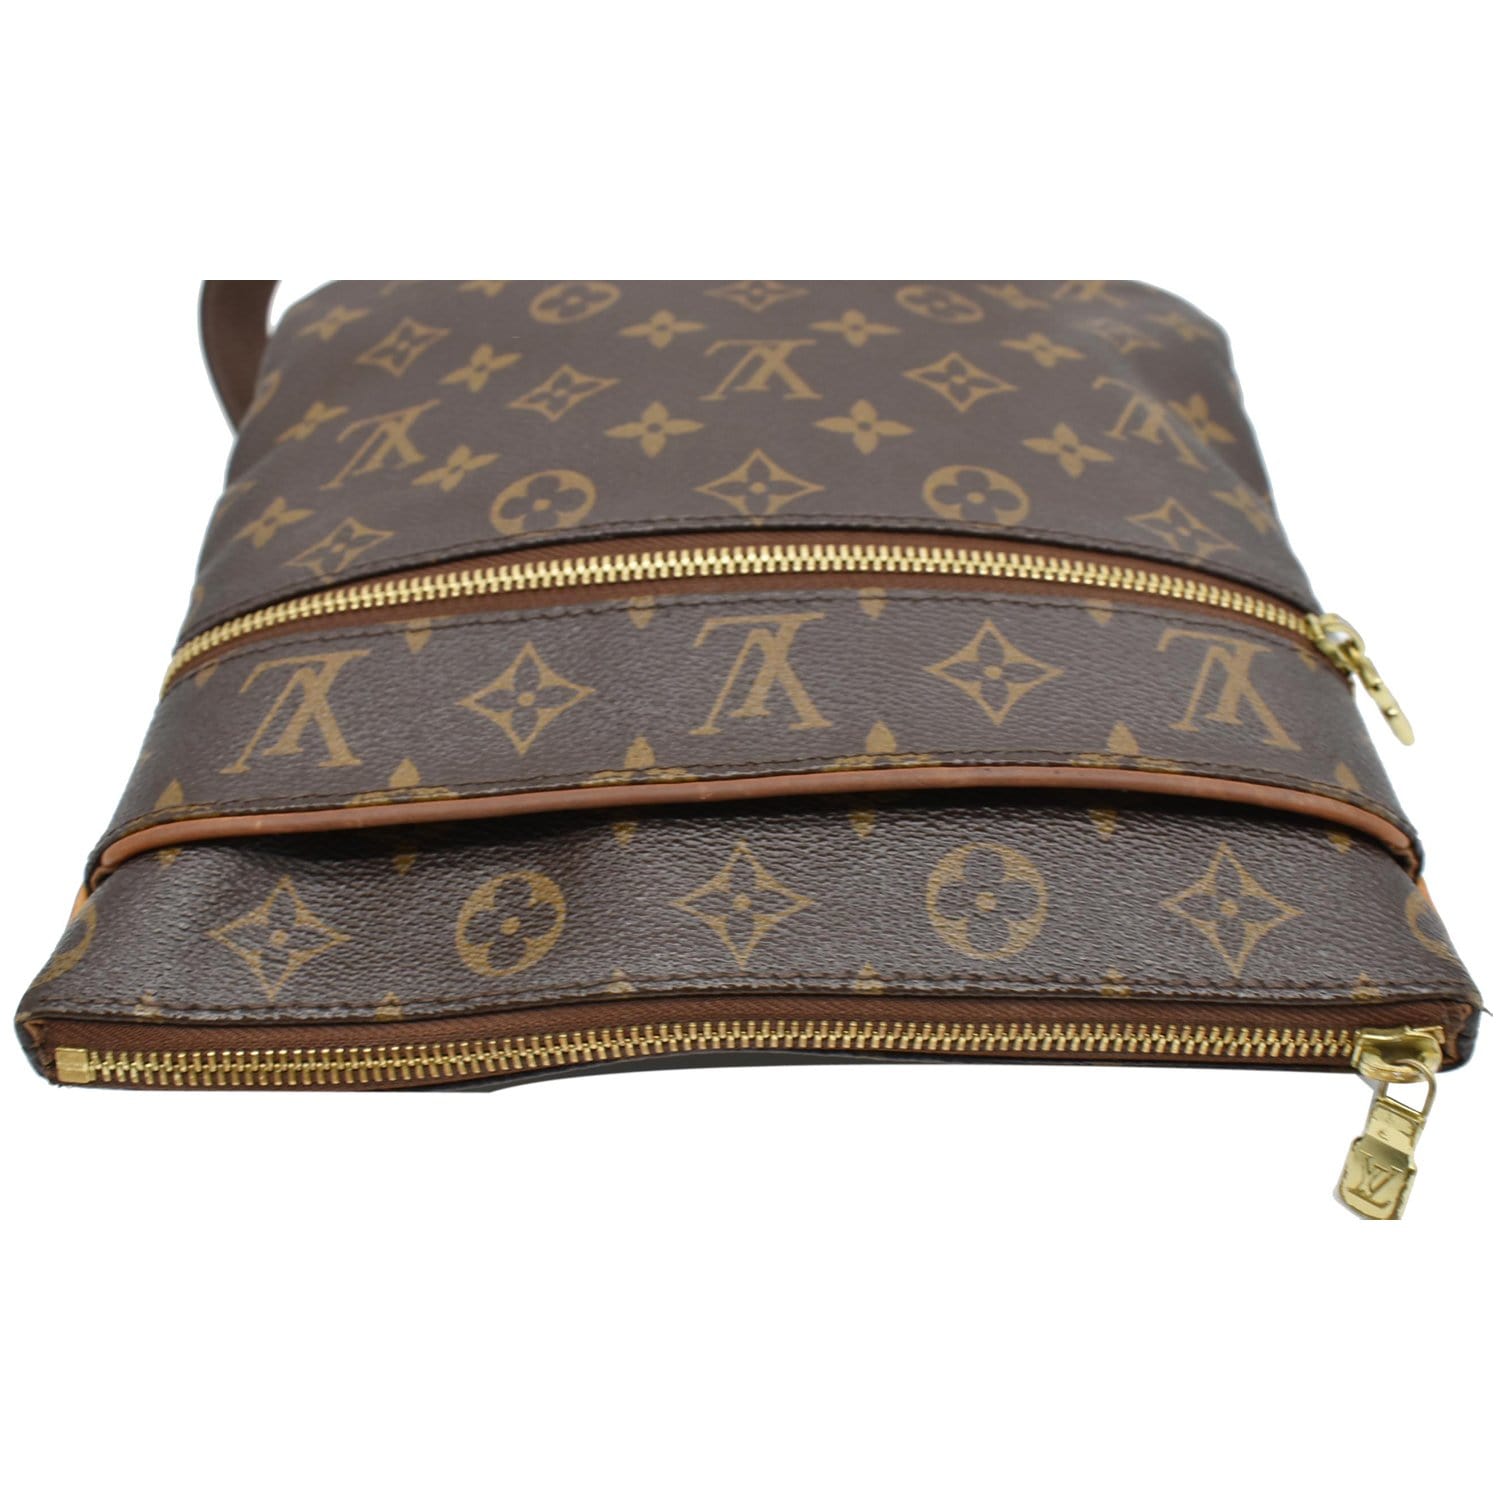 The Louis Vuitton Valmy is the oerfect crossbody for eveey day